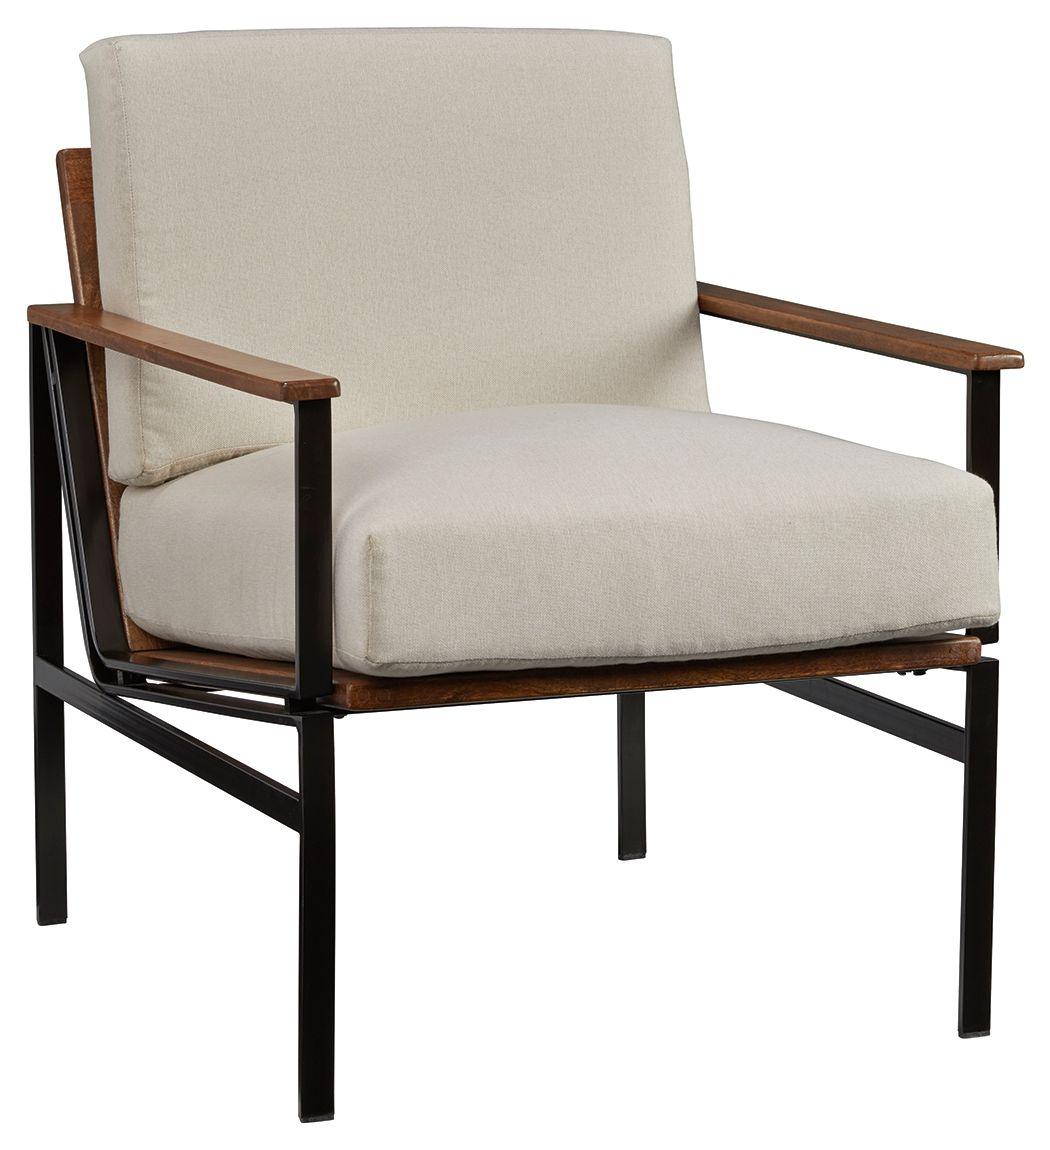 Ashley Furniture - Tilden - Ivory / Brown - Accent Chair - 5th Avenue Furniture